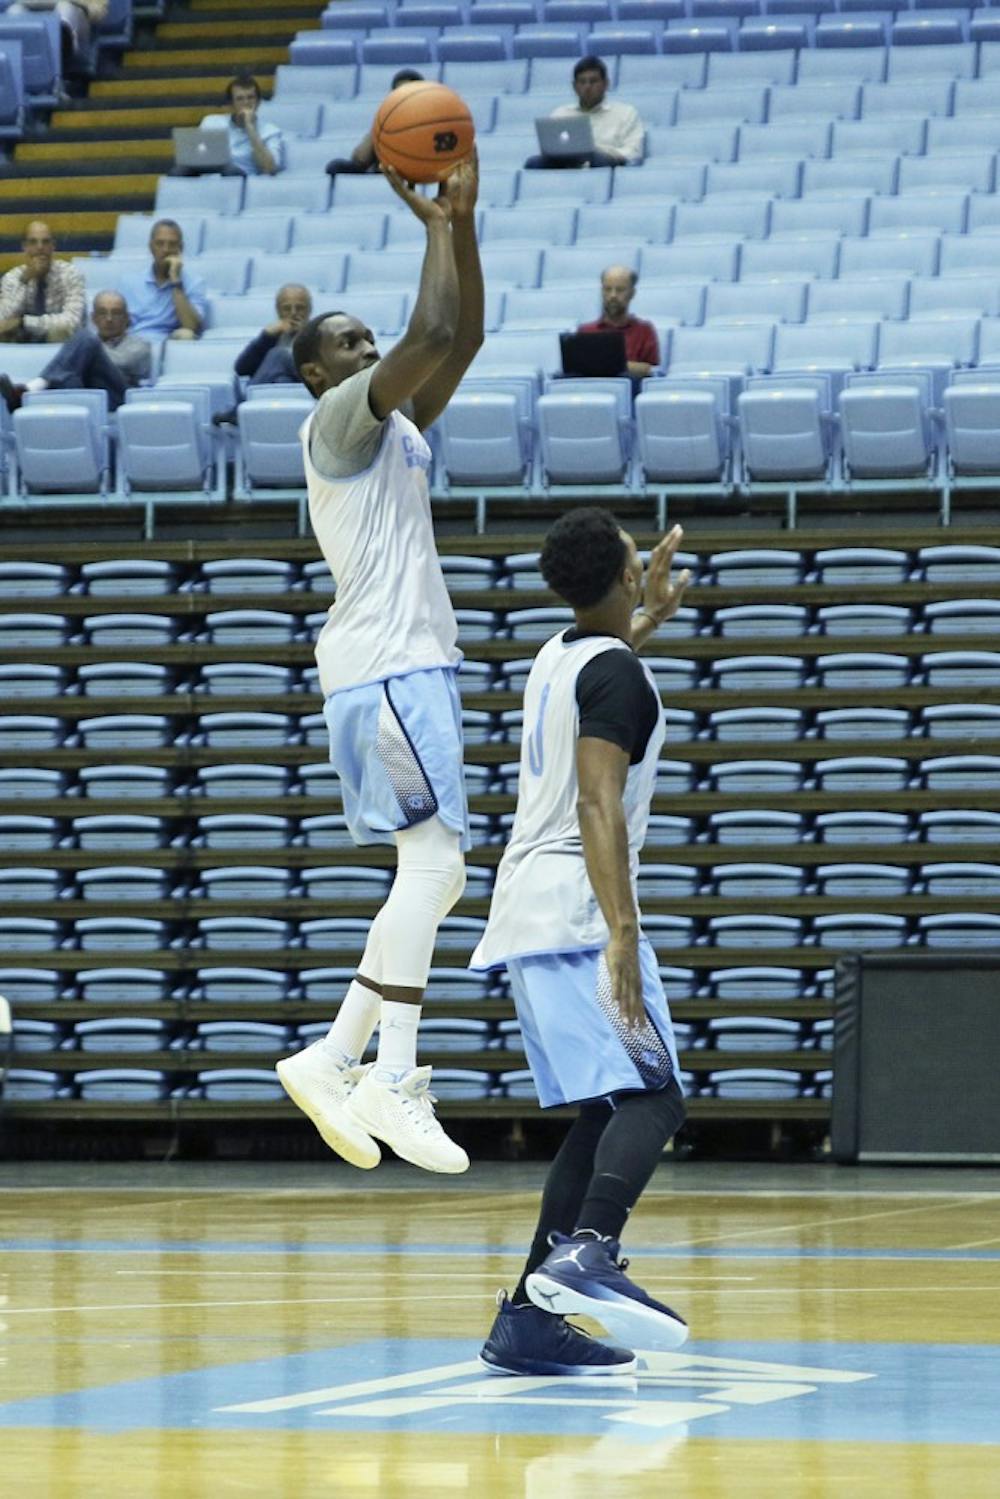 UNC forward Theo Pinson (1)&nbsp;pulls up for a shot over guard&nbsp;Nate Britt (0) during practice on&nbsp;UNC Media Day on October 11th. Pinson has since fractured his foot and is out indefinitely.&nbsp;